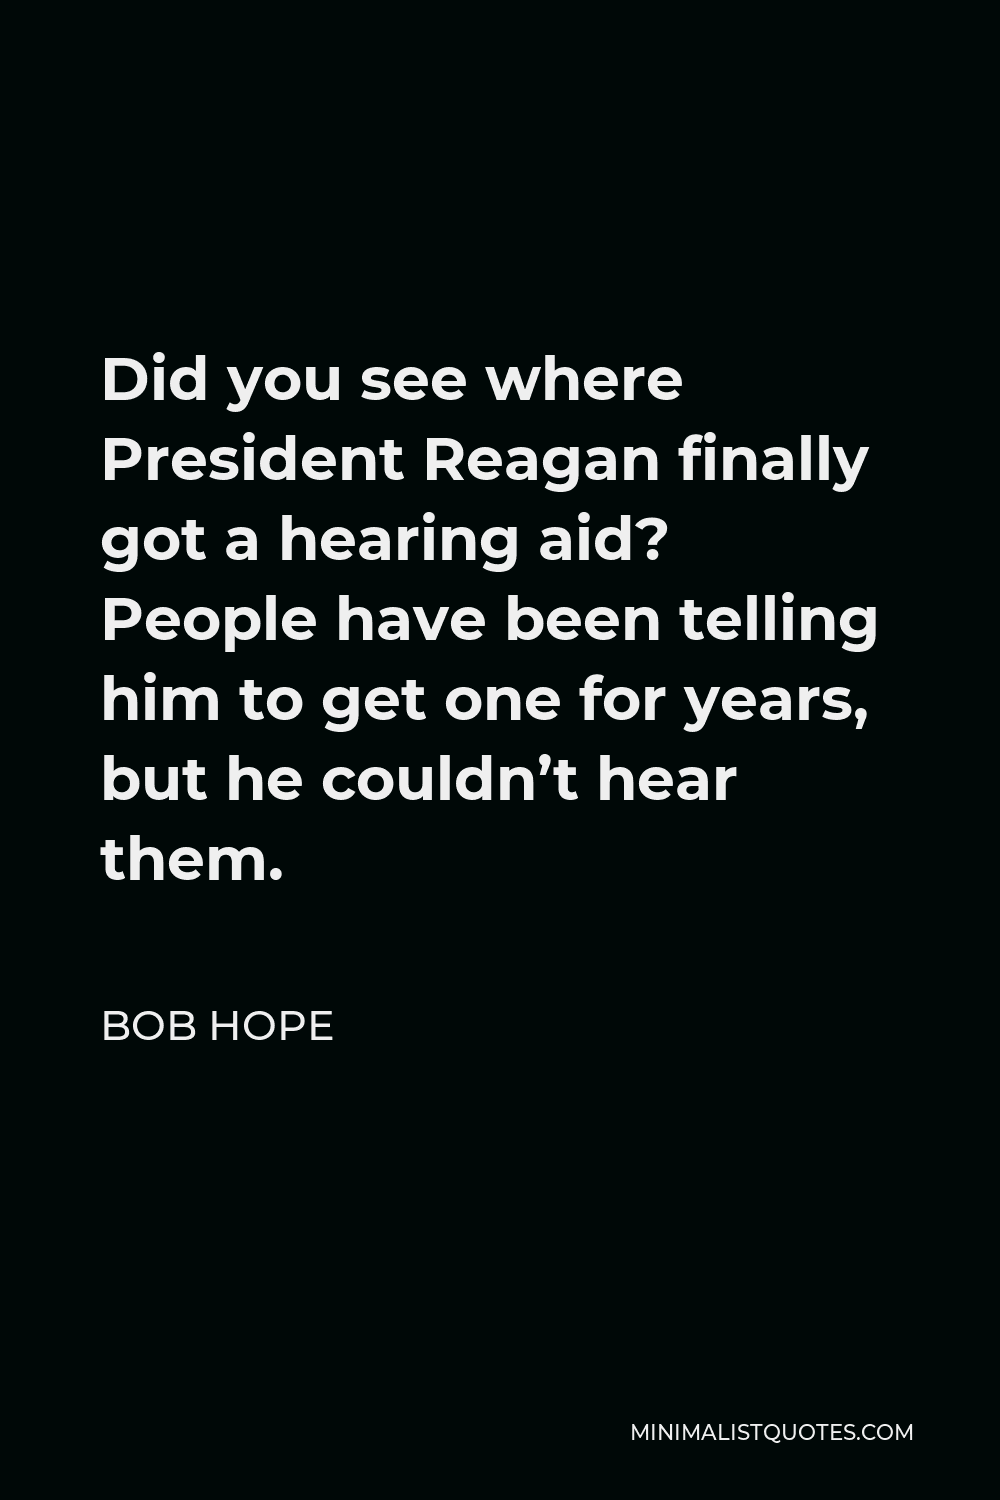 bob-hope-quote-did-you-see-where-president-reagan-finally-got-a